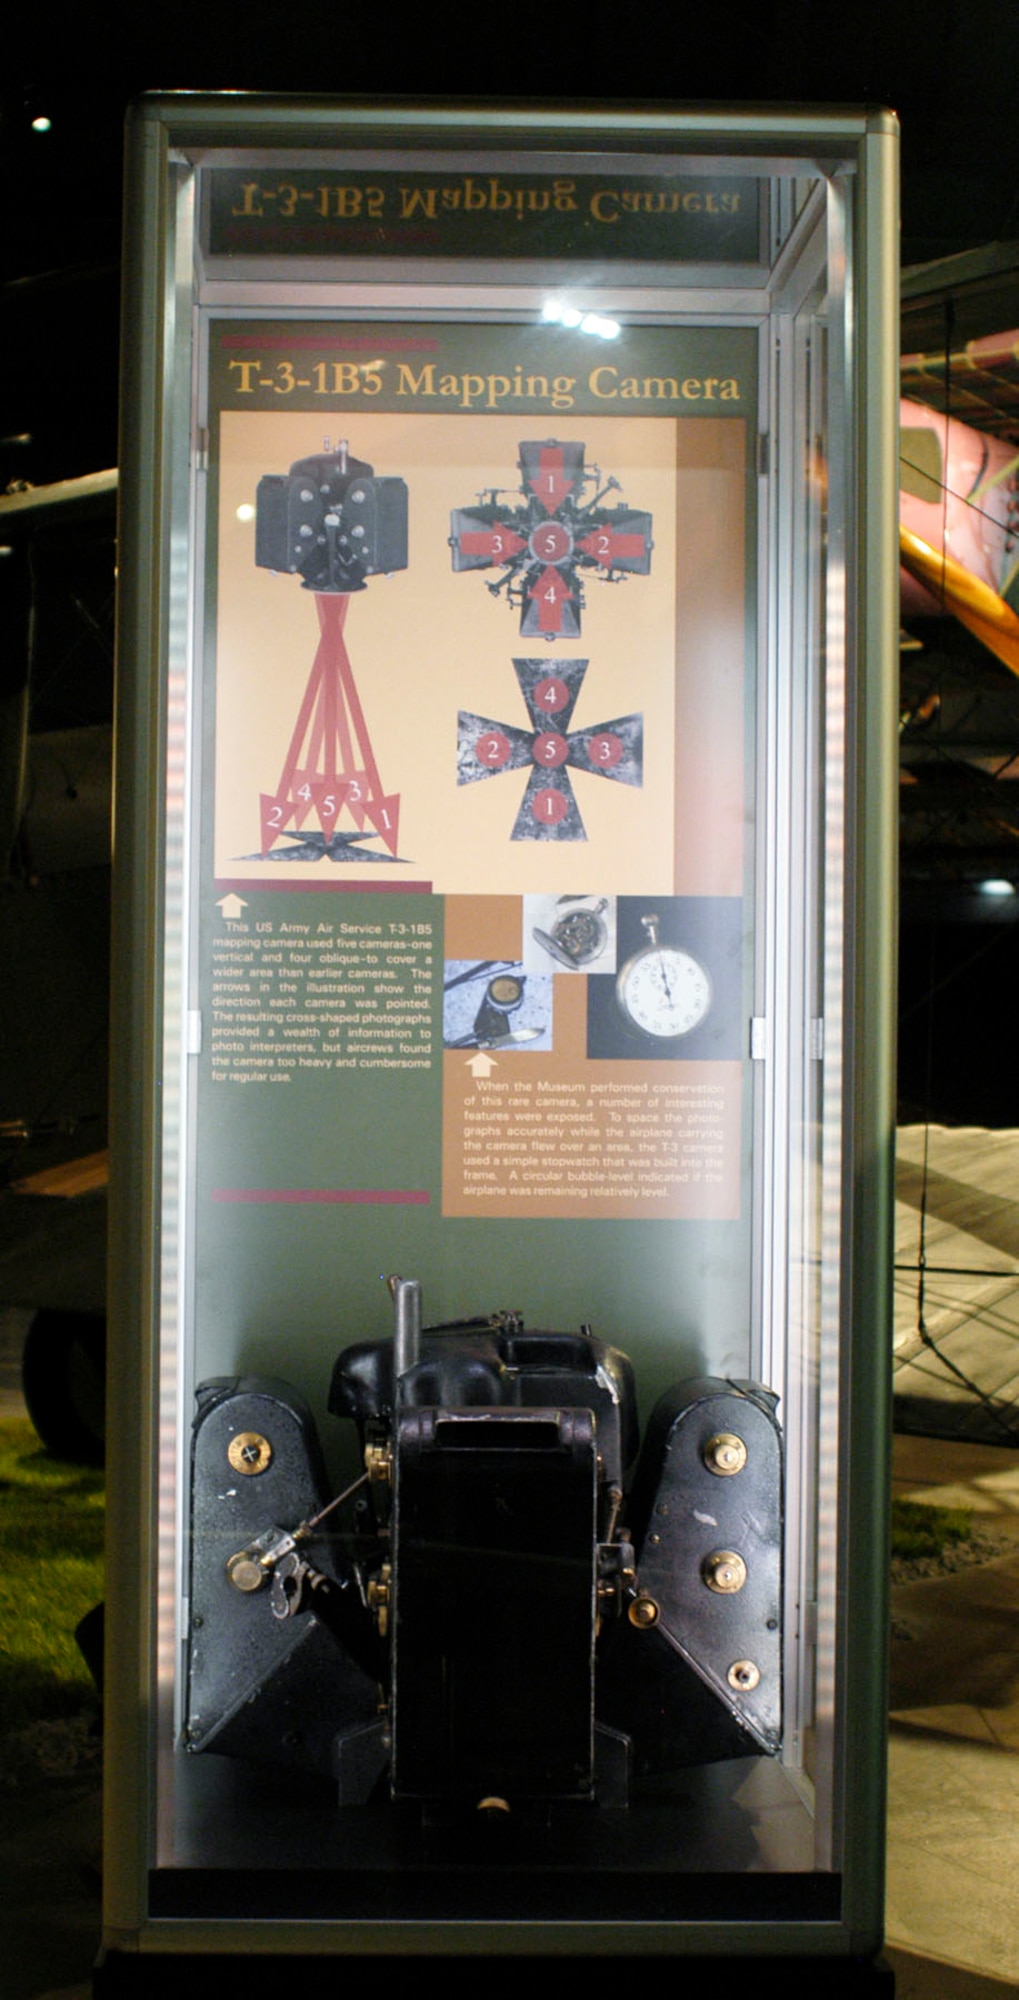 DAYTON, Ohio -- T-3-1B5 Mapping Camera on display in the Early Years Gallery at the National Museum of the United States Air Force. (U.S. Air Force photo)